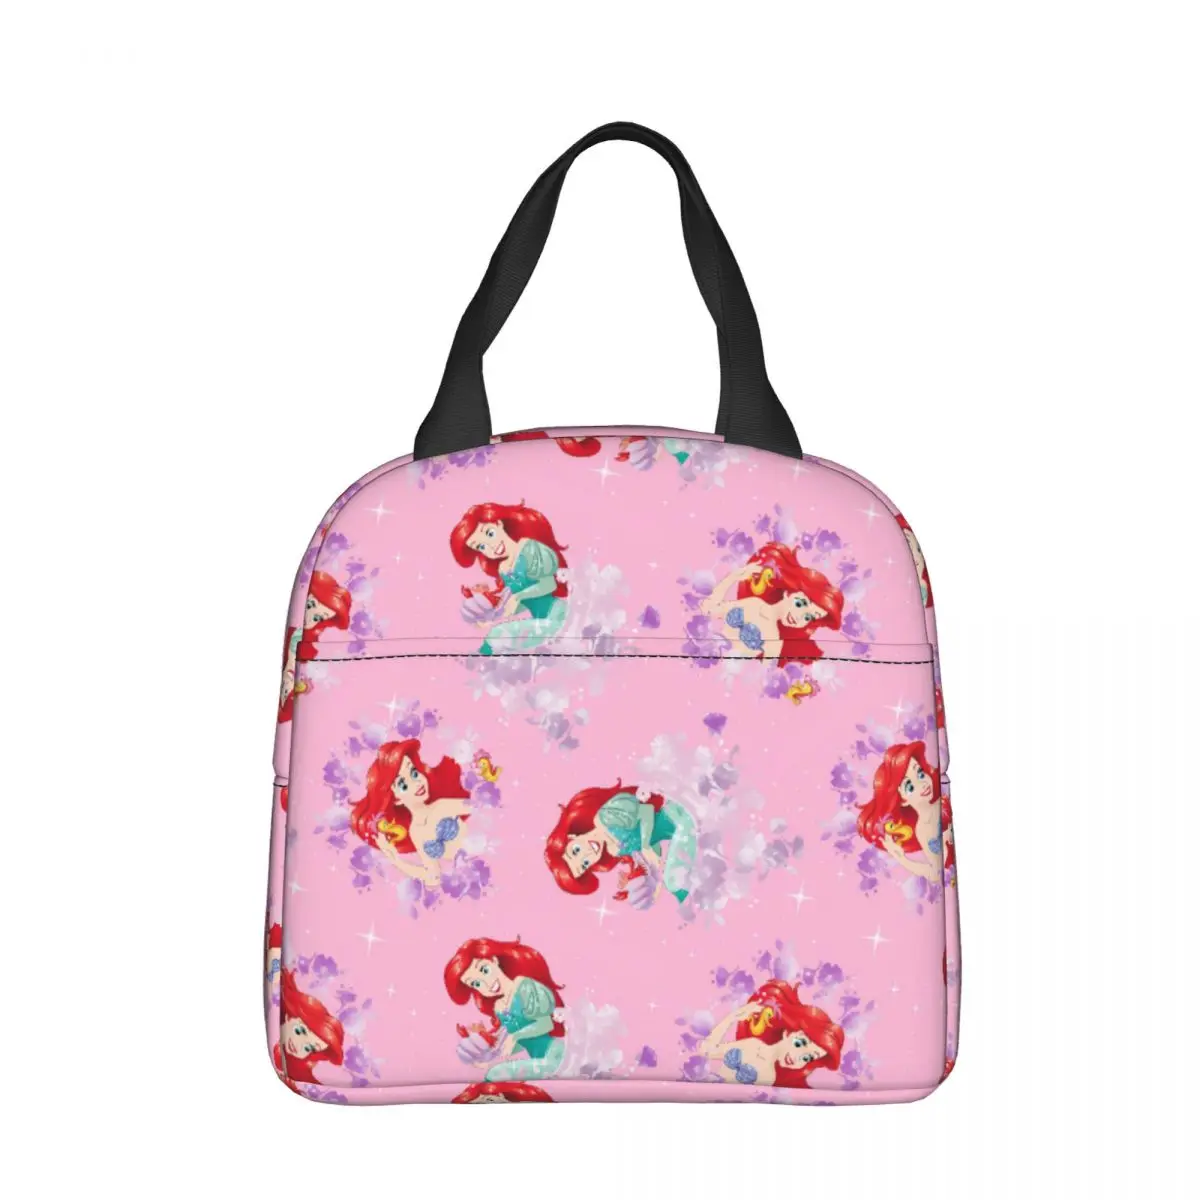 

Disney The Little Mermaid Anime Insulated Lunch Bag High Capacity Ariel Princess Lunch Container Thermal Bag Tote Lunch Box